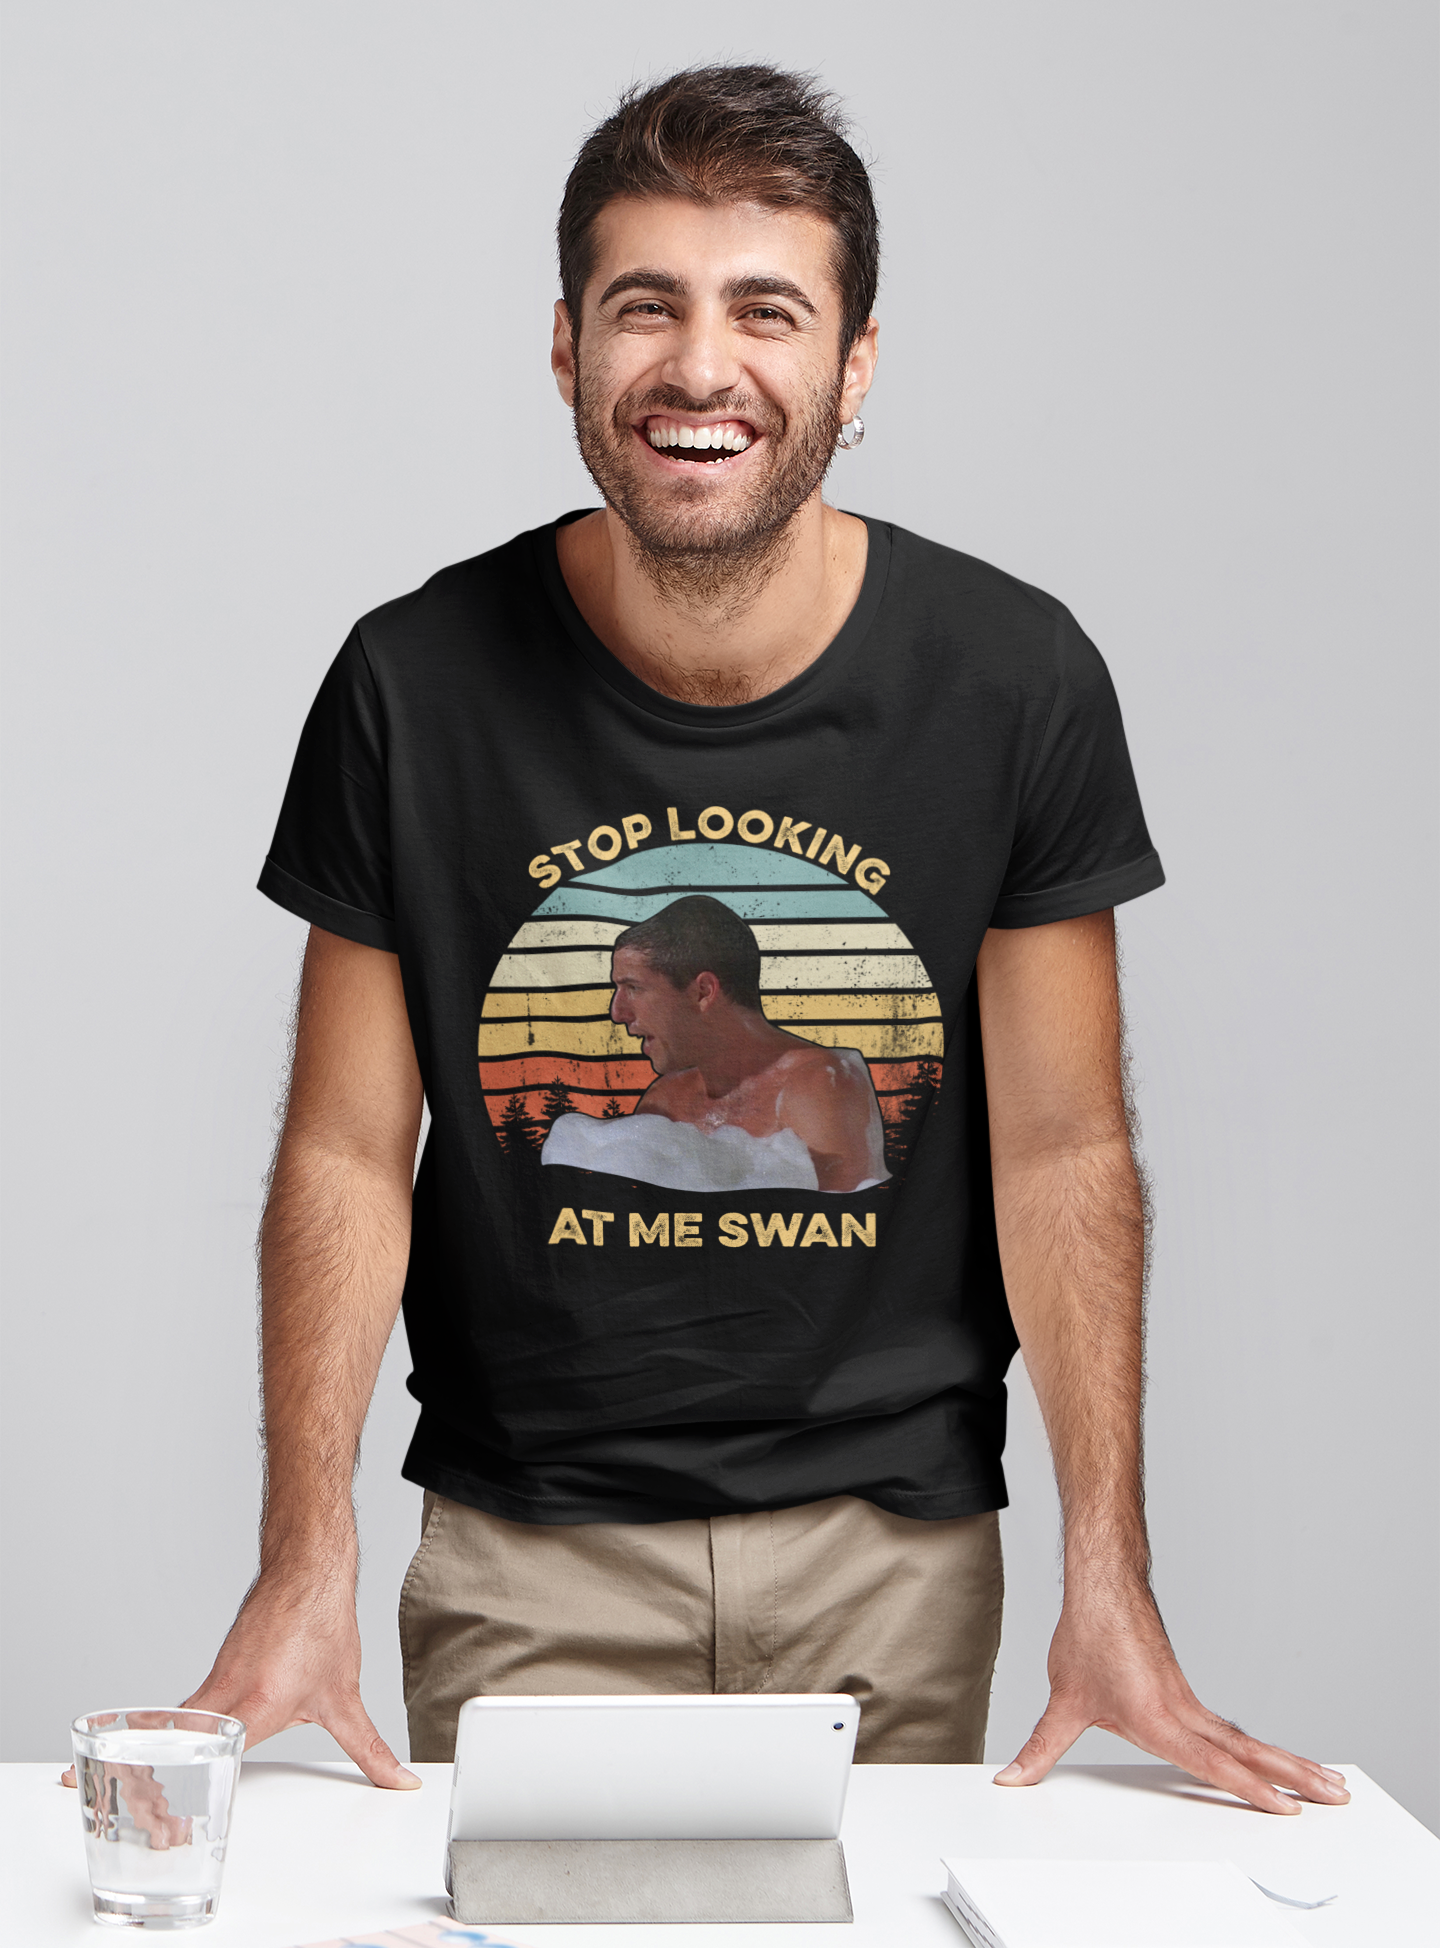 Billy Madison Comedy Film T Shirt, Billy Madison T Shirt, Stop Looking At Me Swan Tshirt